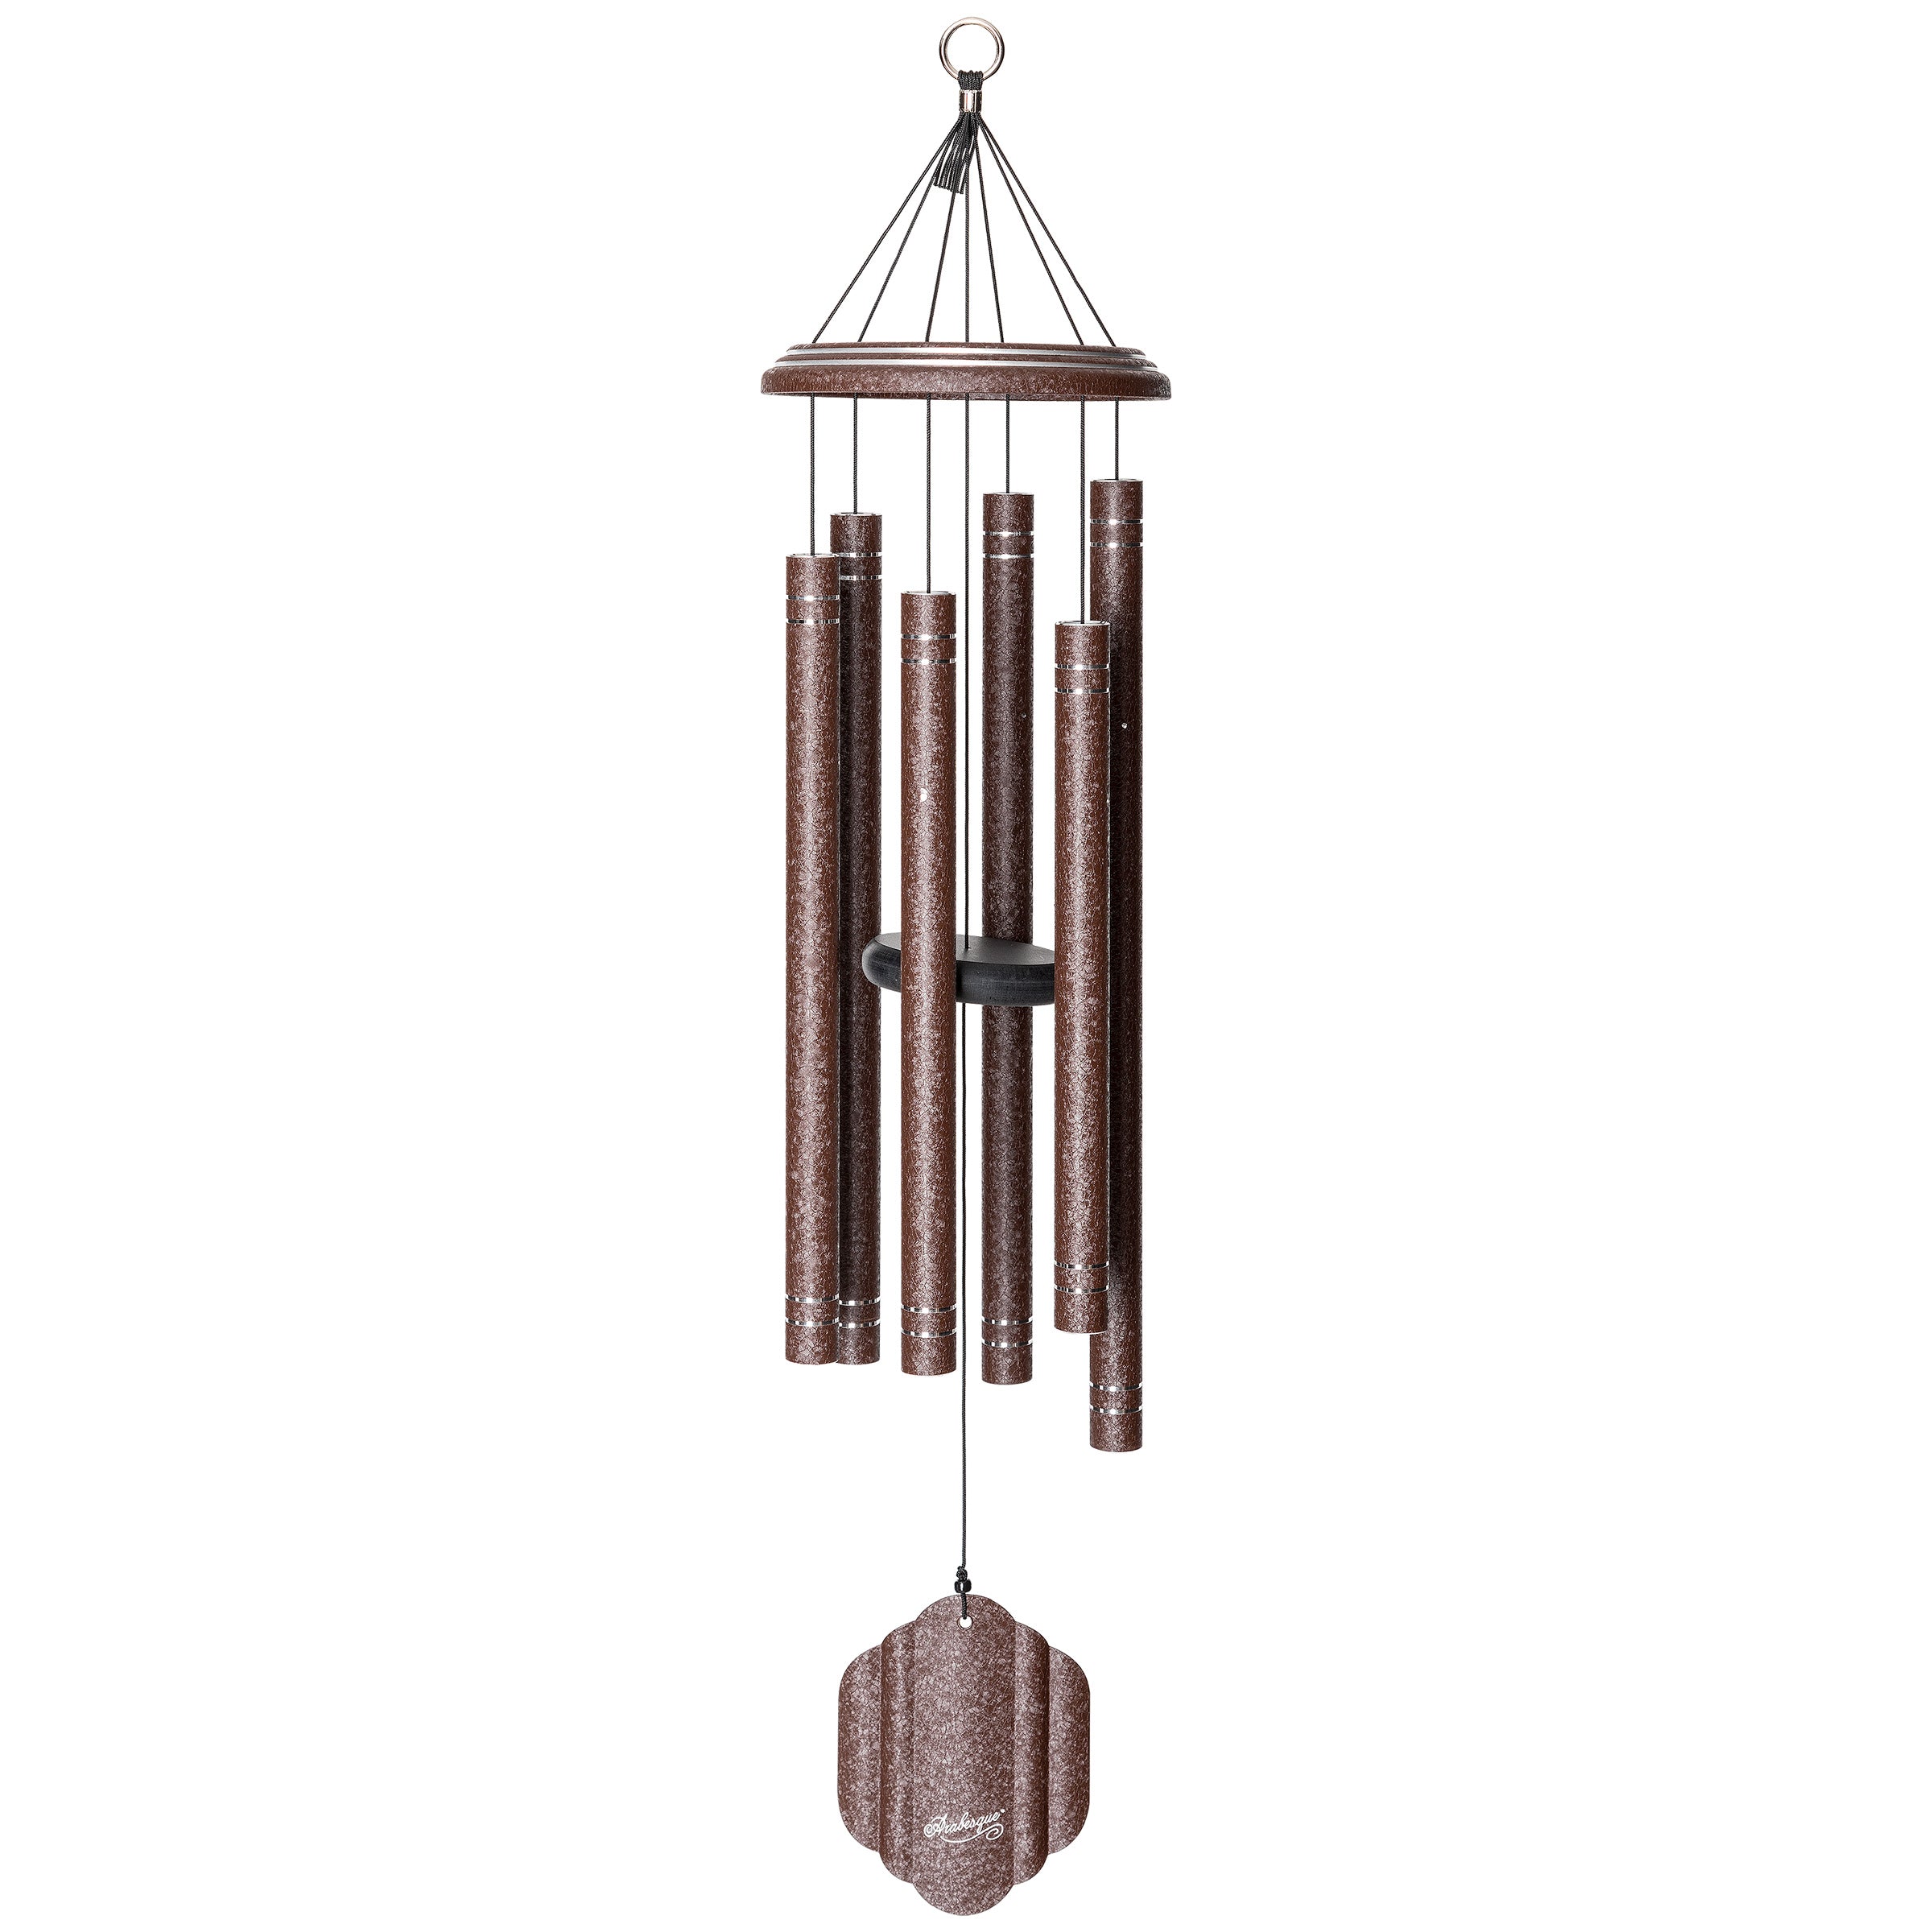 Wind River Arabesque ® 36-inch wind chimes